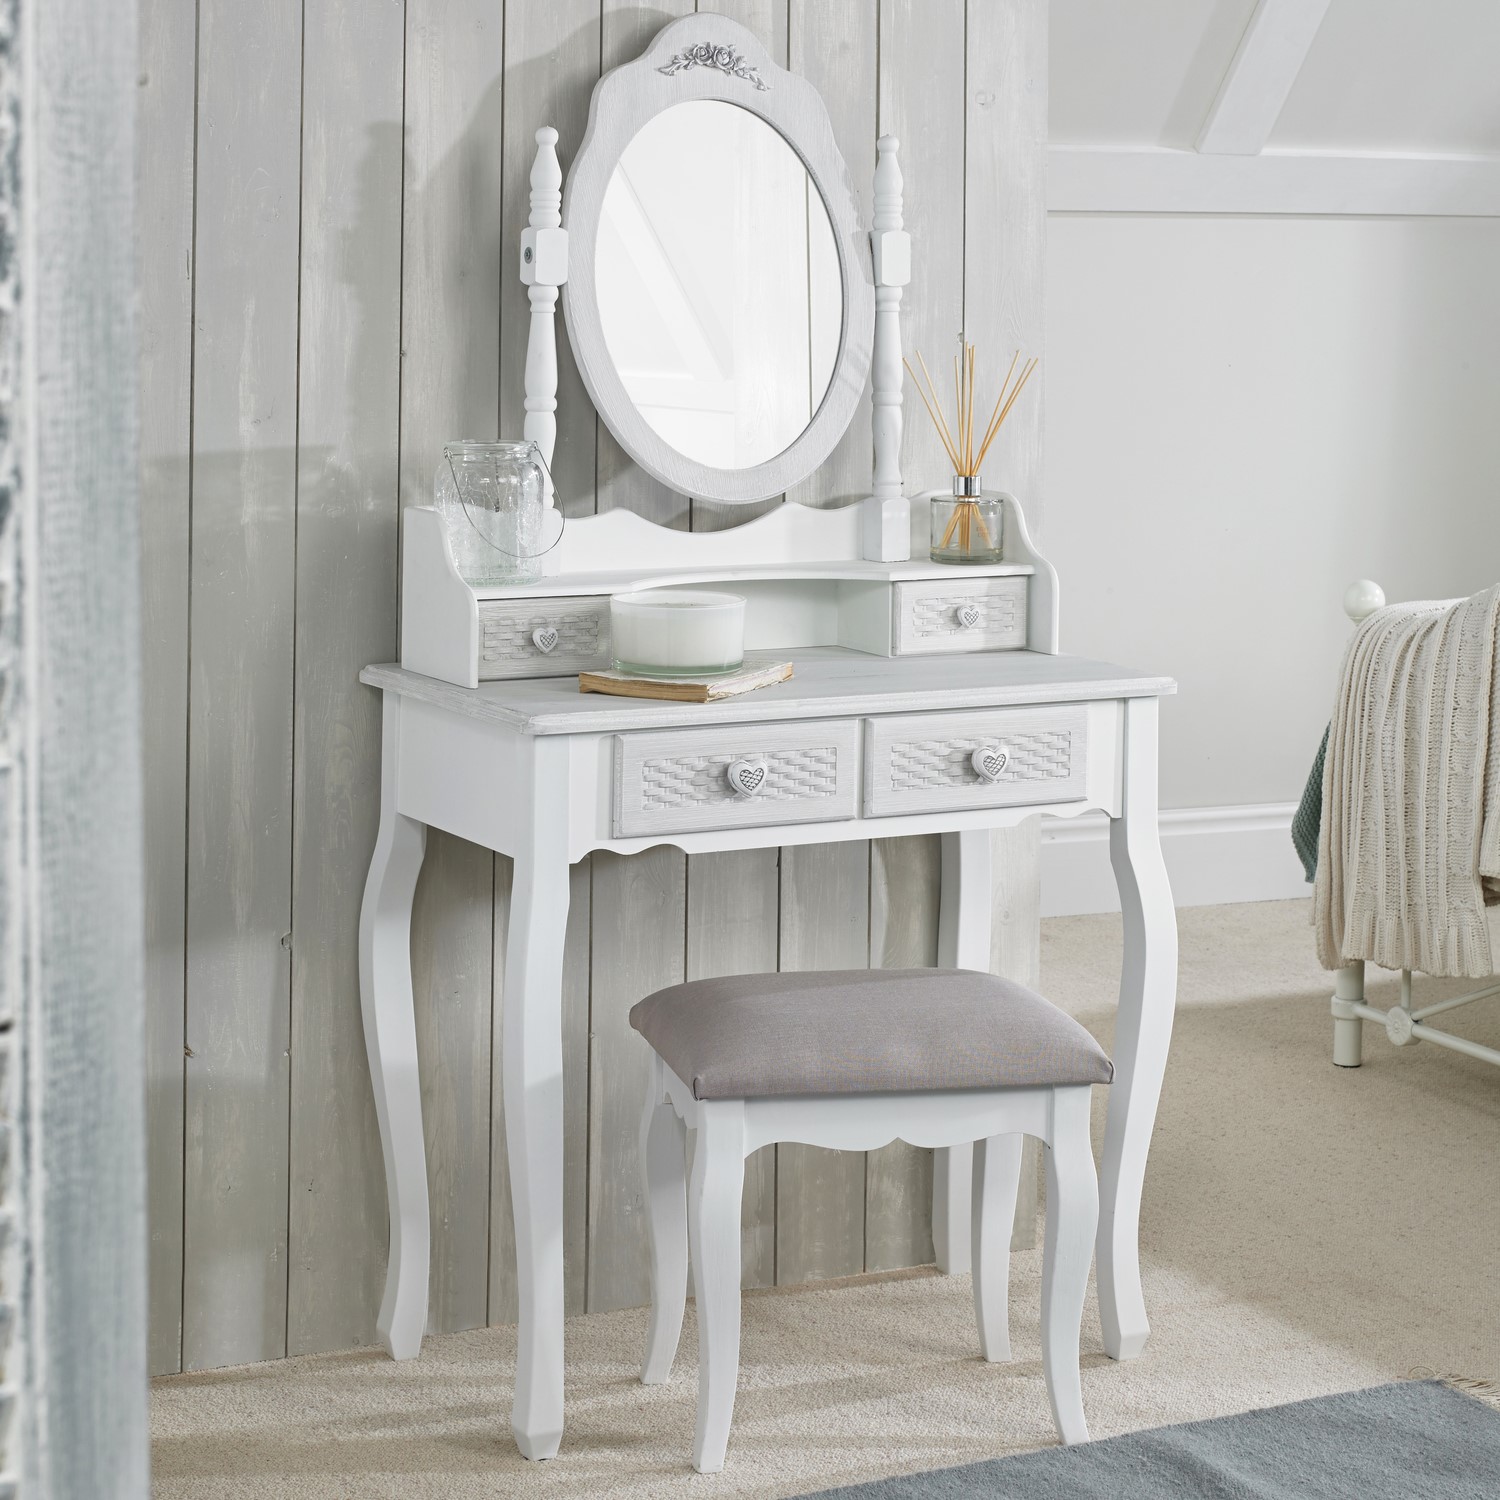 Photo of White painted french dressing table - brittany - lpd